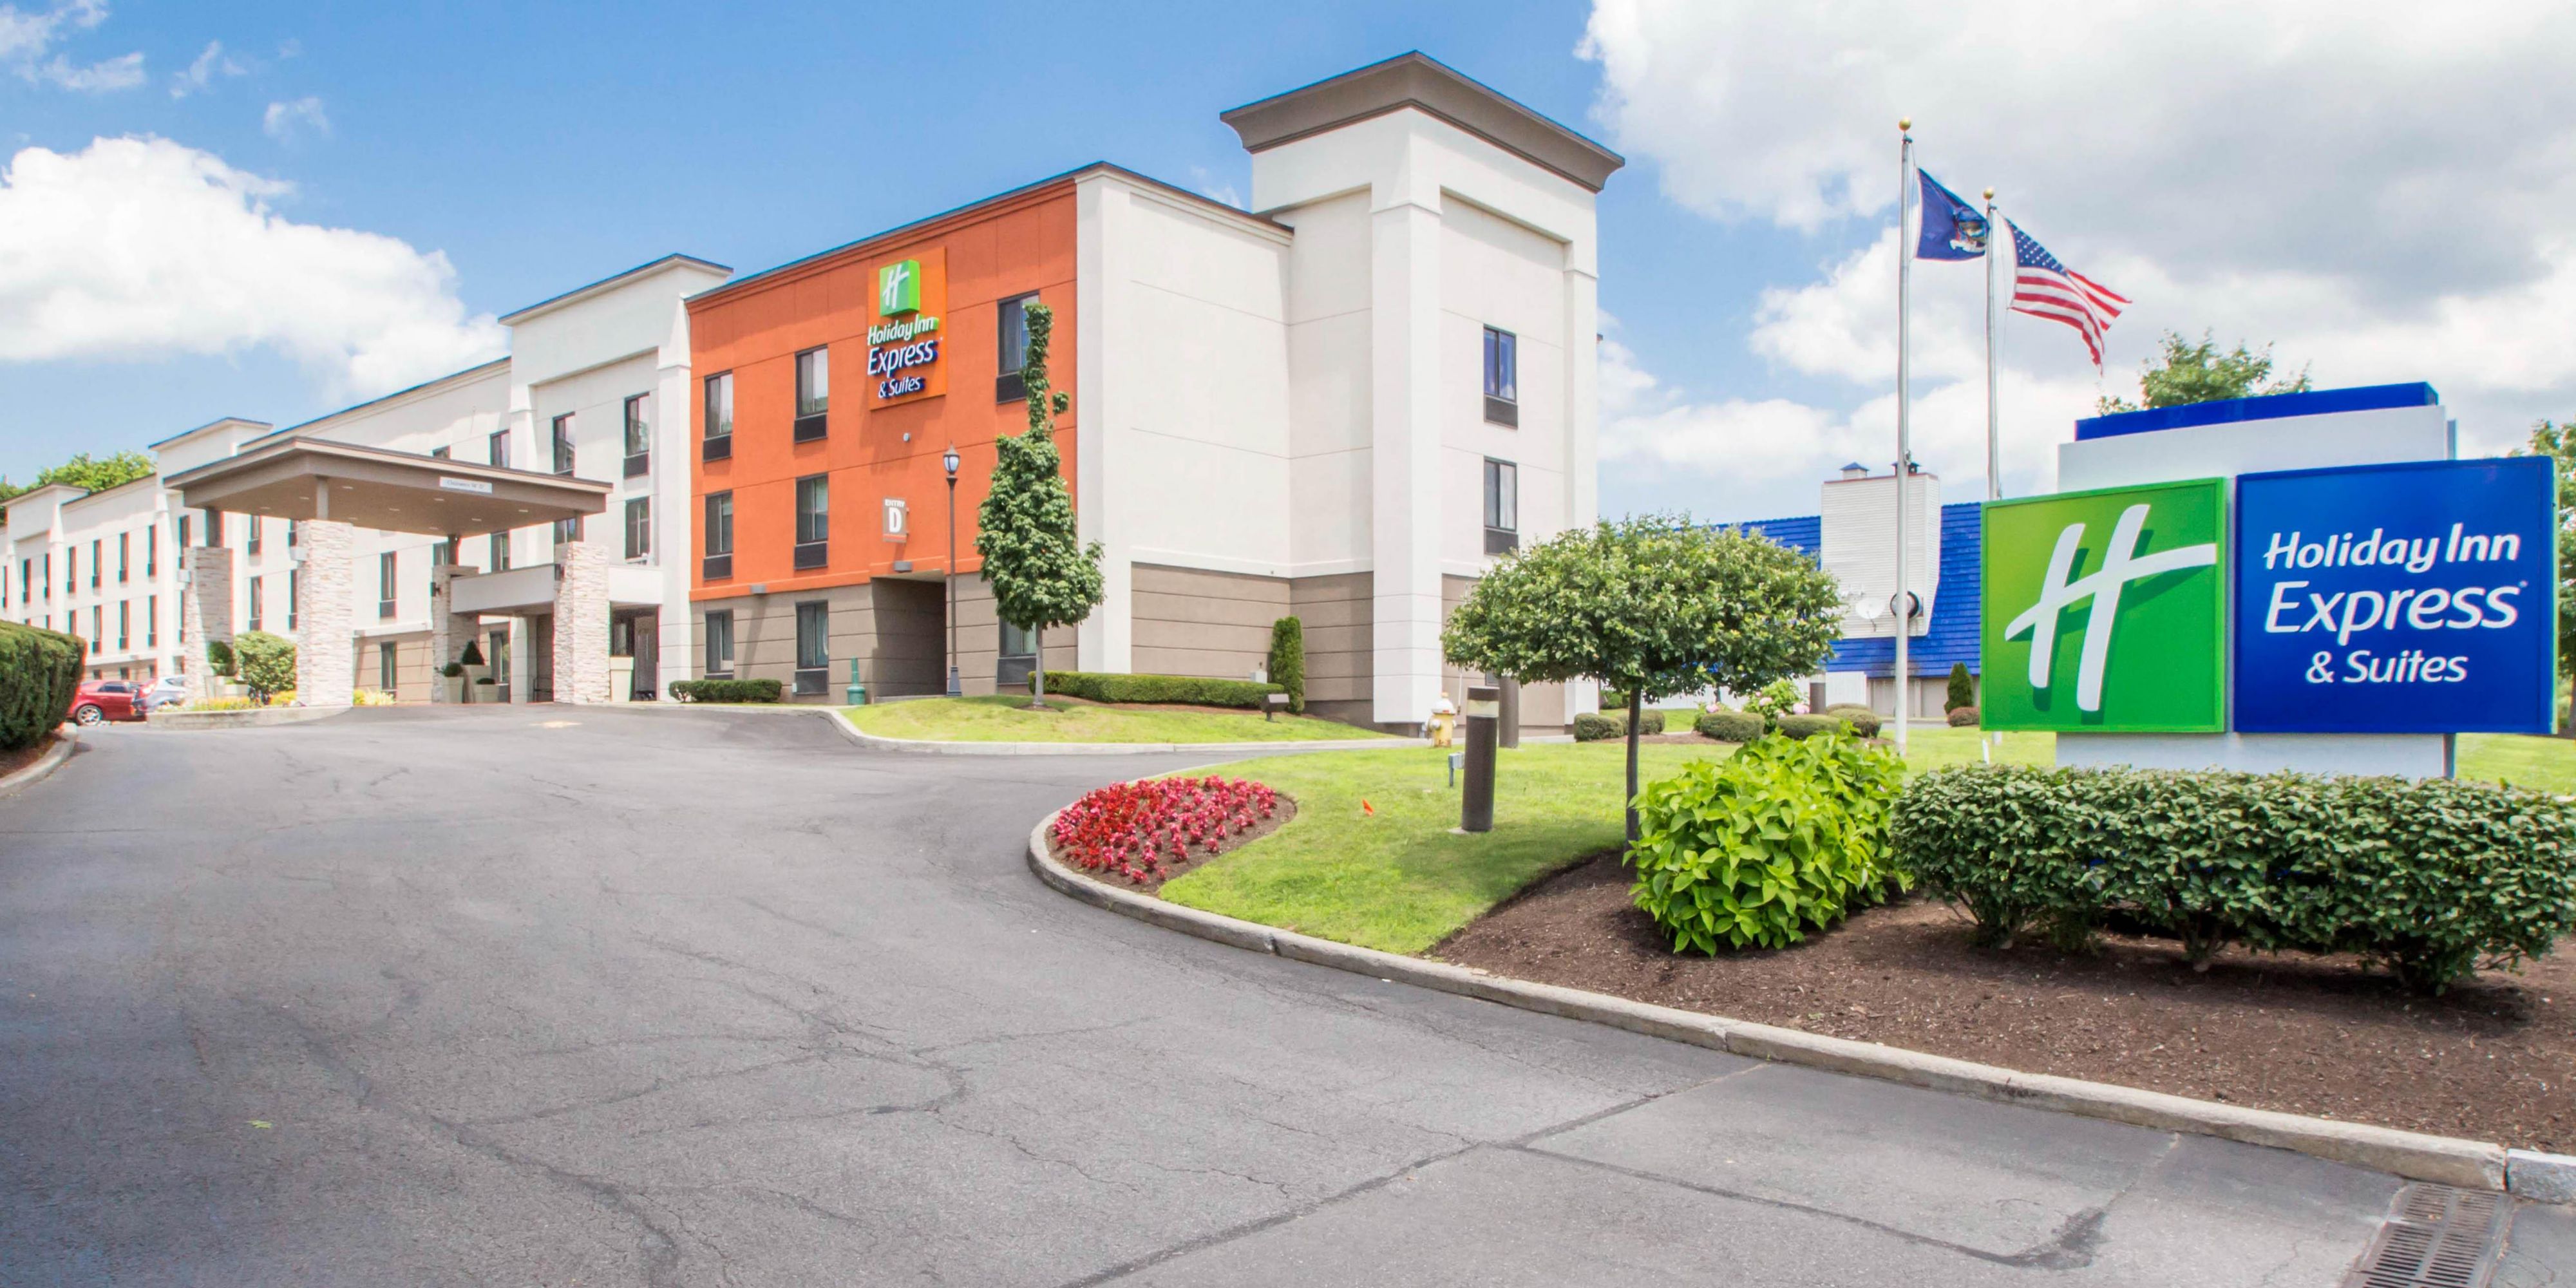 We have ample parking and easy access from most interstates in the area.  We appreciate those in the transportation and distribution industries assisting the nation through this crisis.  We have available parking and would be honored to have you as an overnight guest in our hotel.